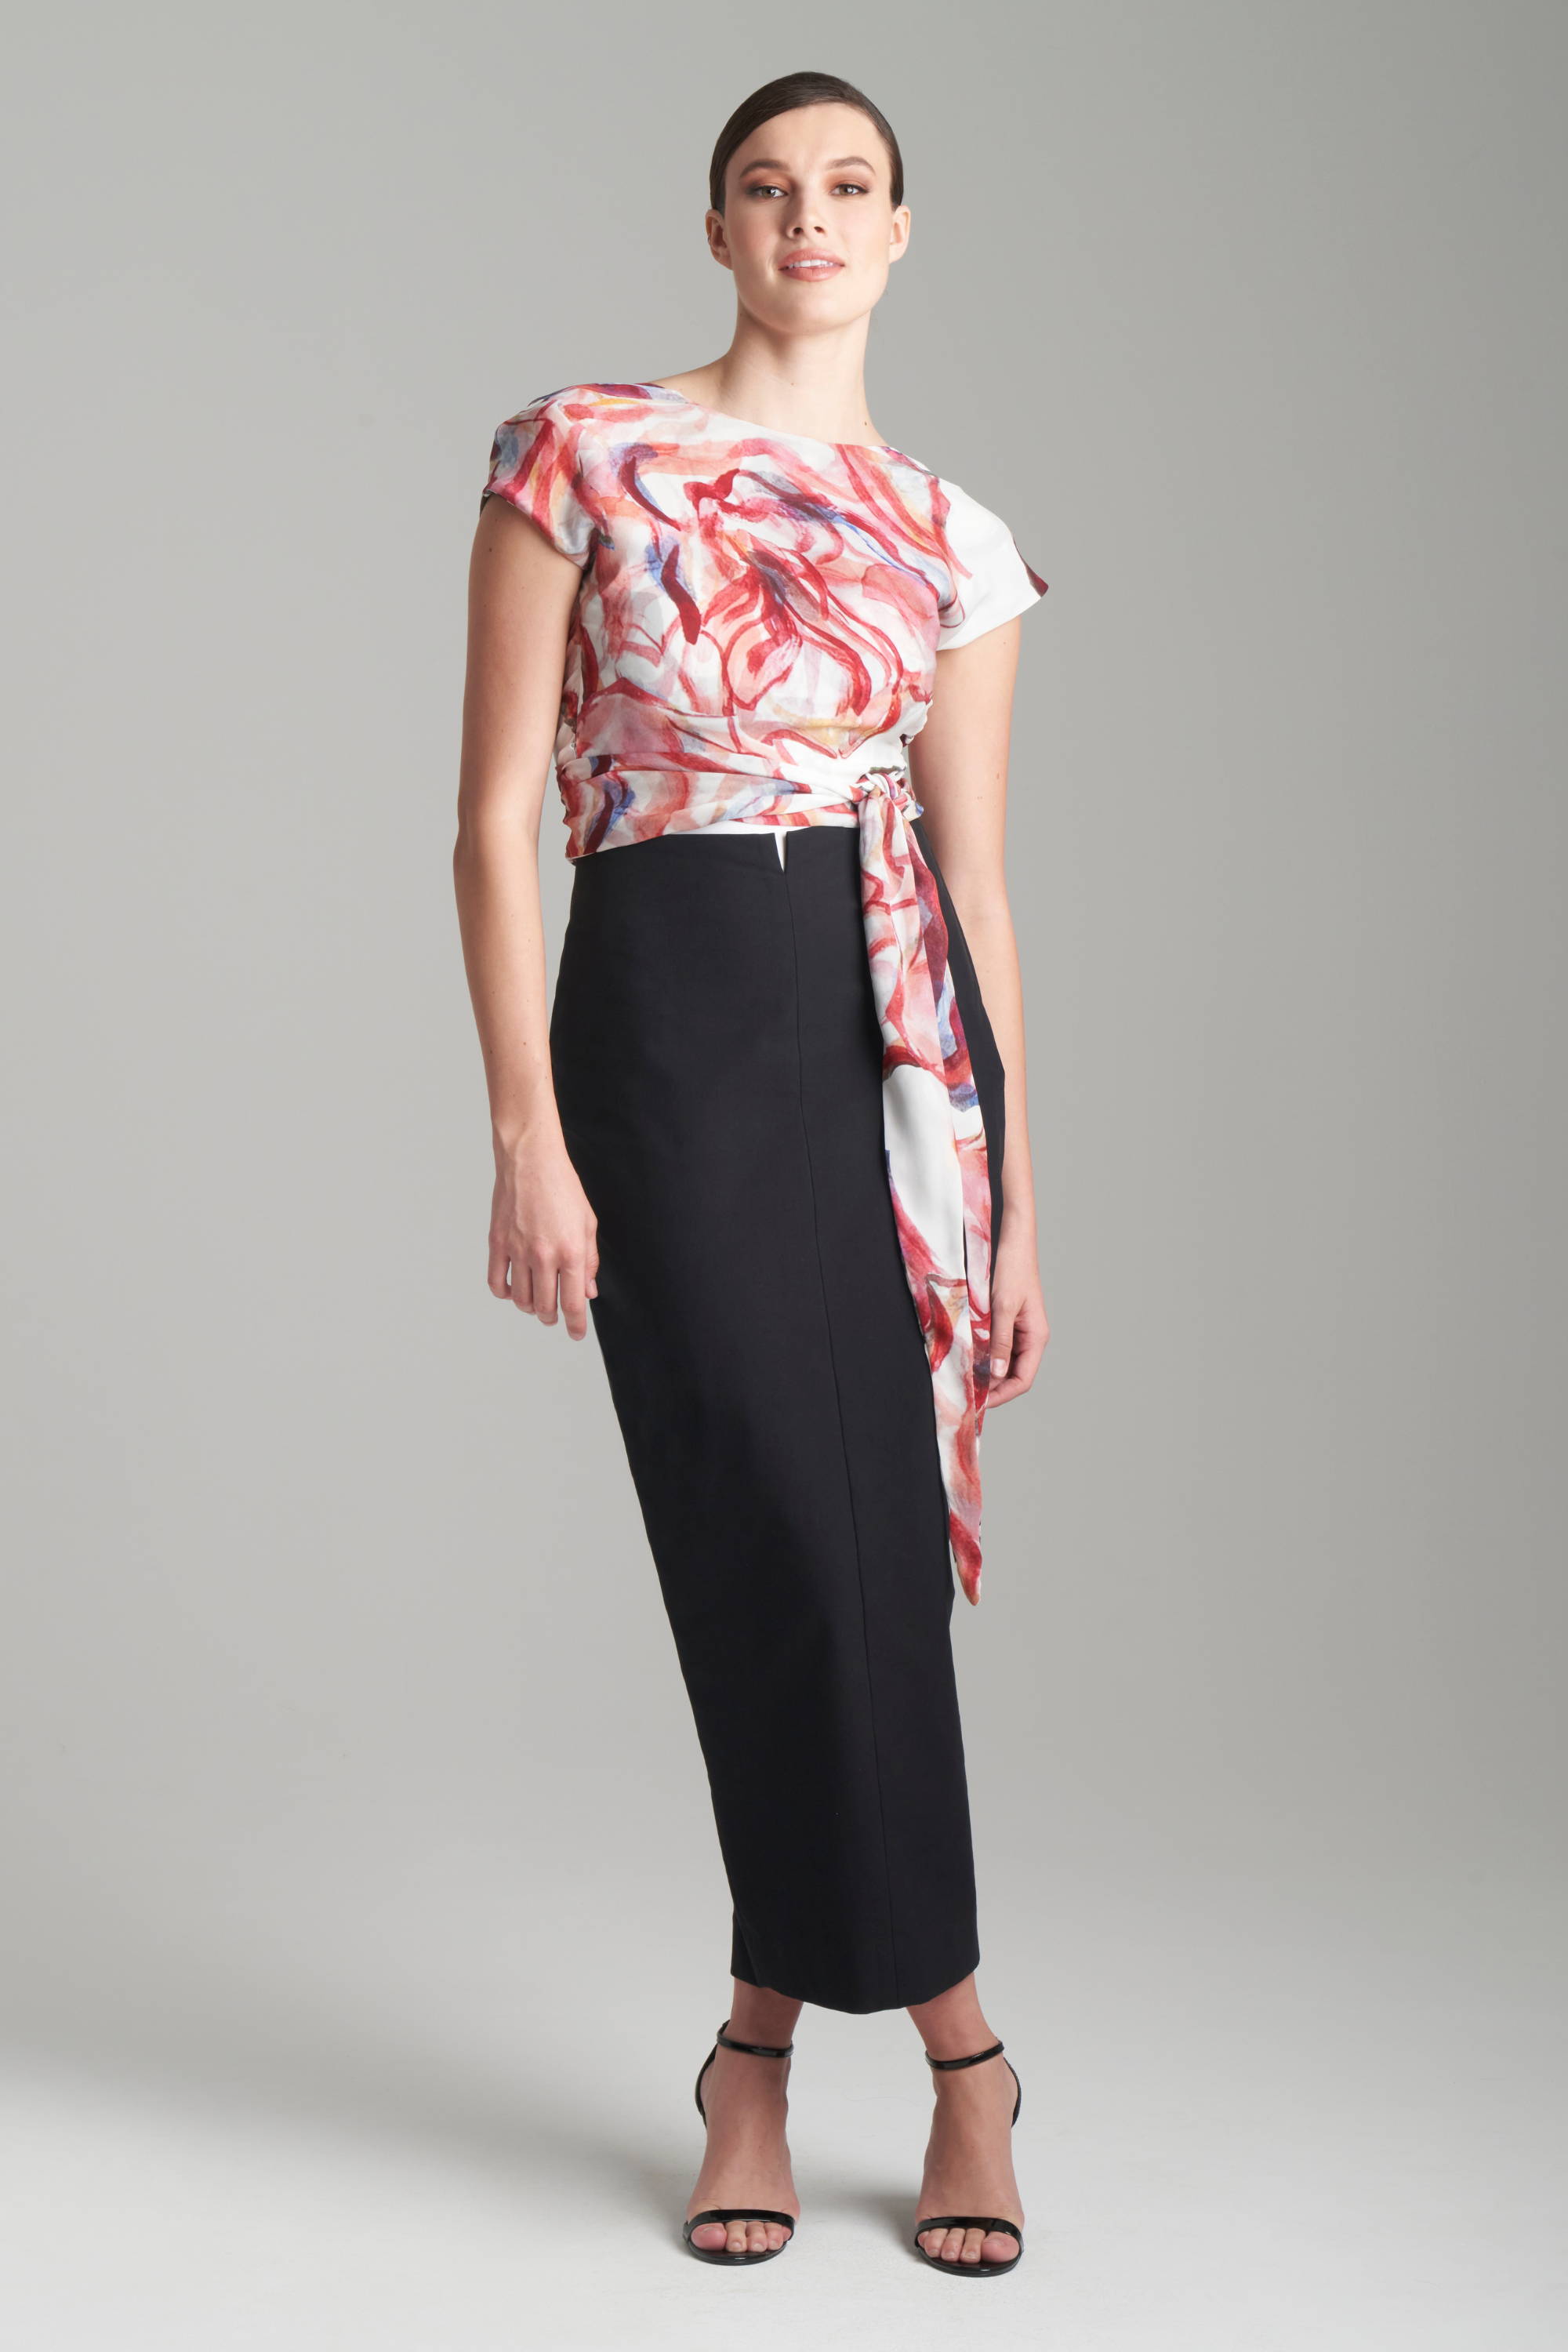 Woman wearing red and white reversible silk wrap top with black cotton pencil skirt by Ala von Auersperg